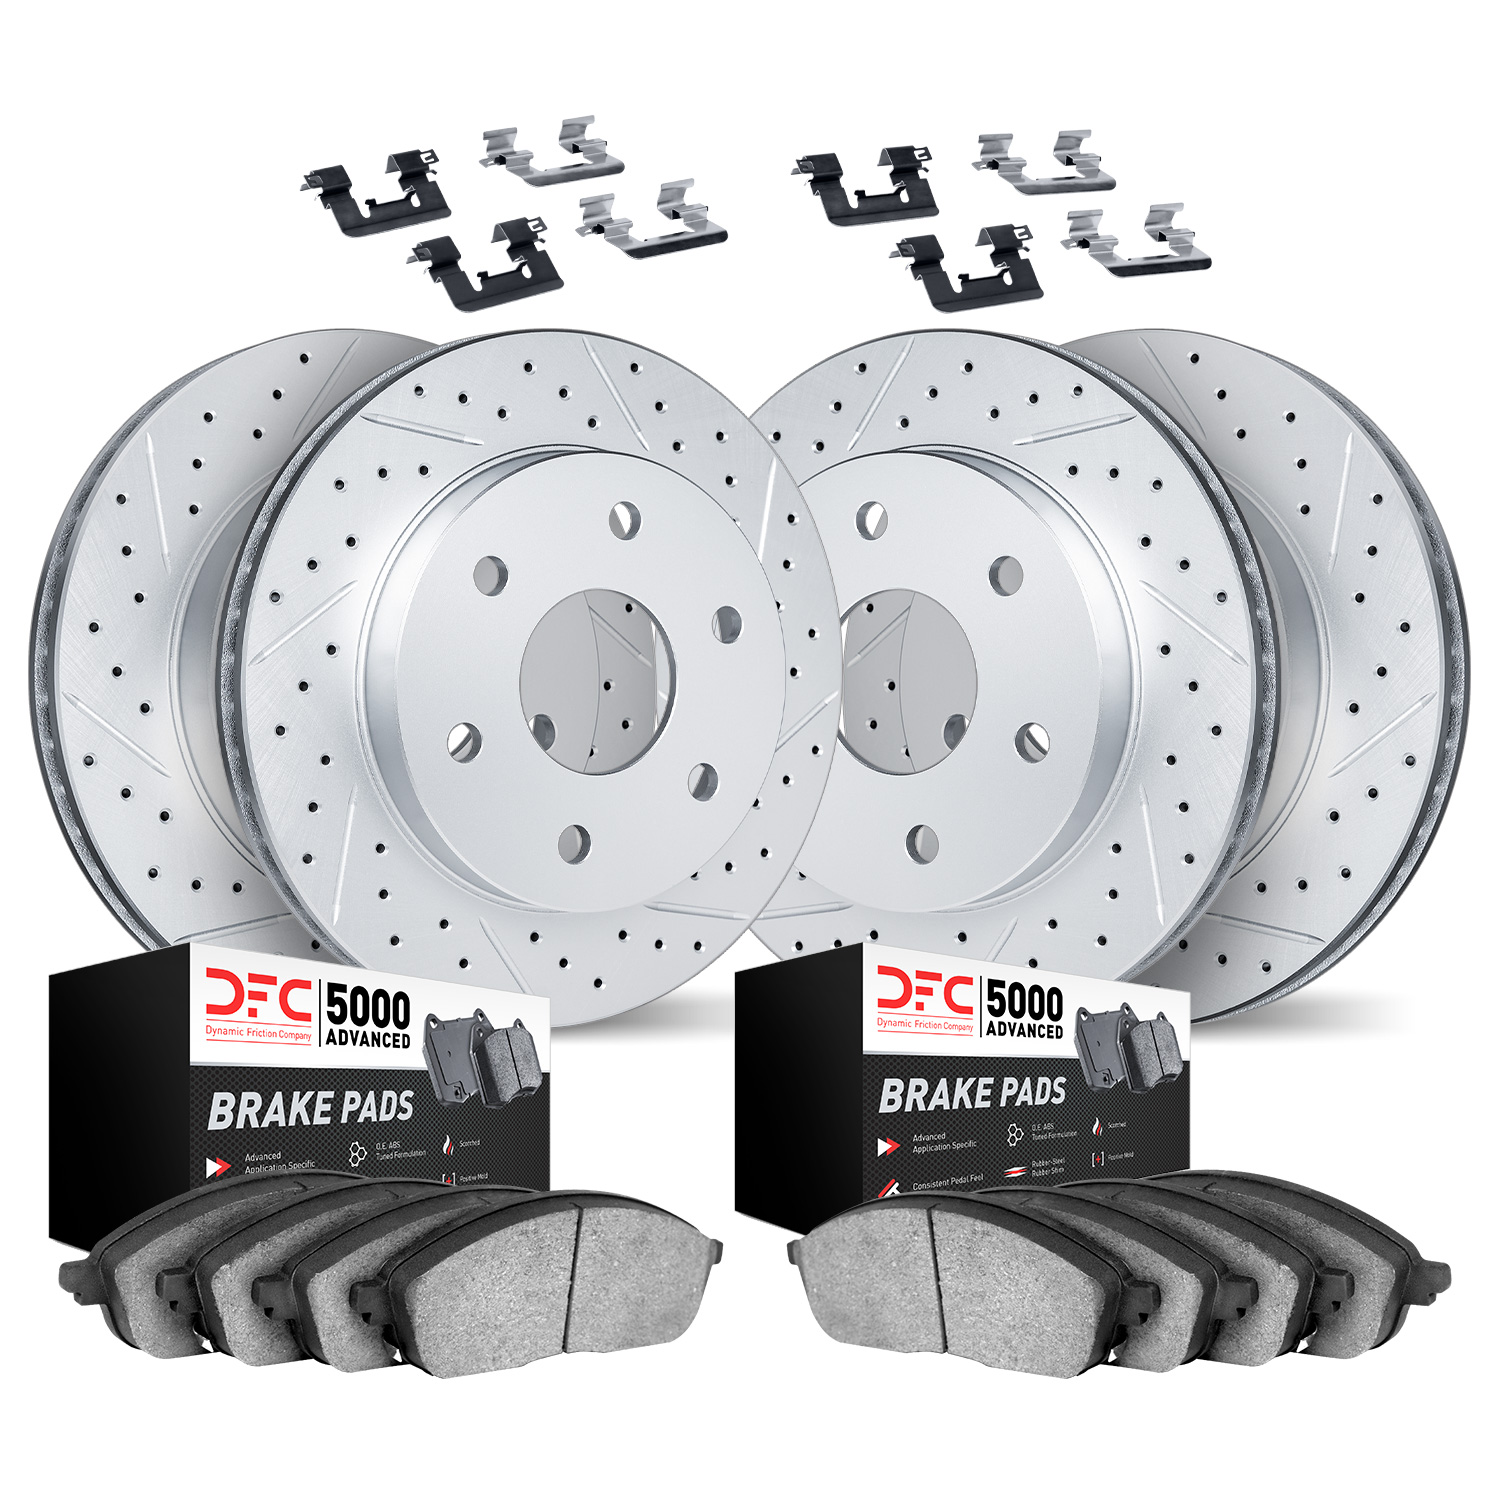 2514-48023 Geoperformance Drilled/Slotted Rotors w/5000 Advanced Brake Pads Kit & Hardware, 2009-2014 GM, Position: Front and Re